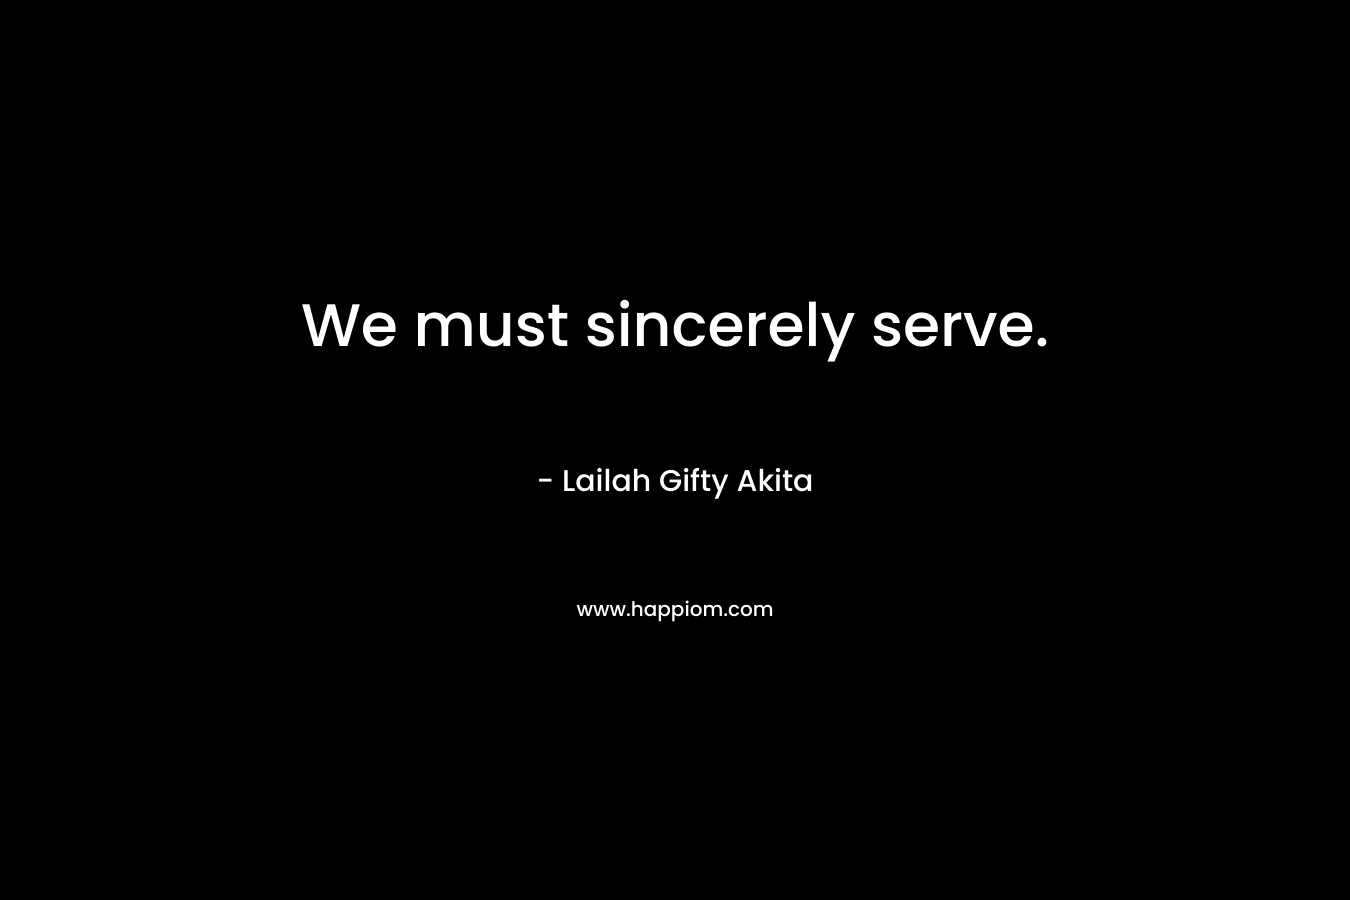 We must sincerely serve.